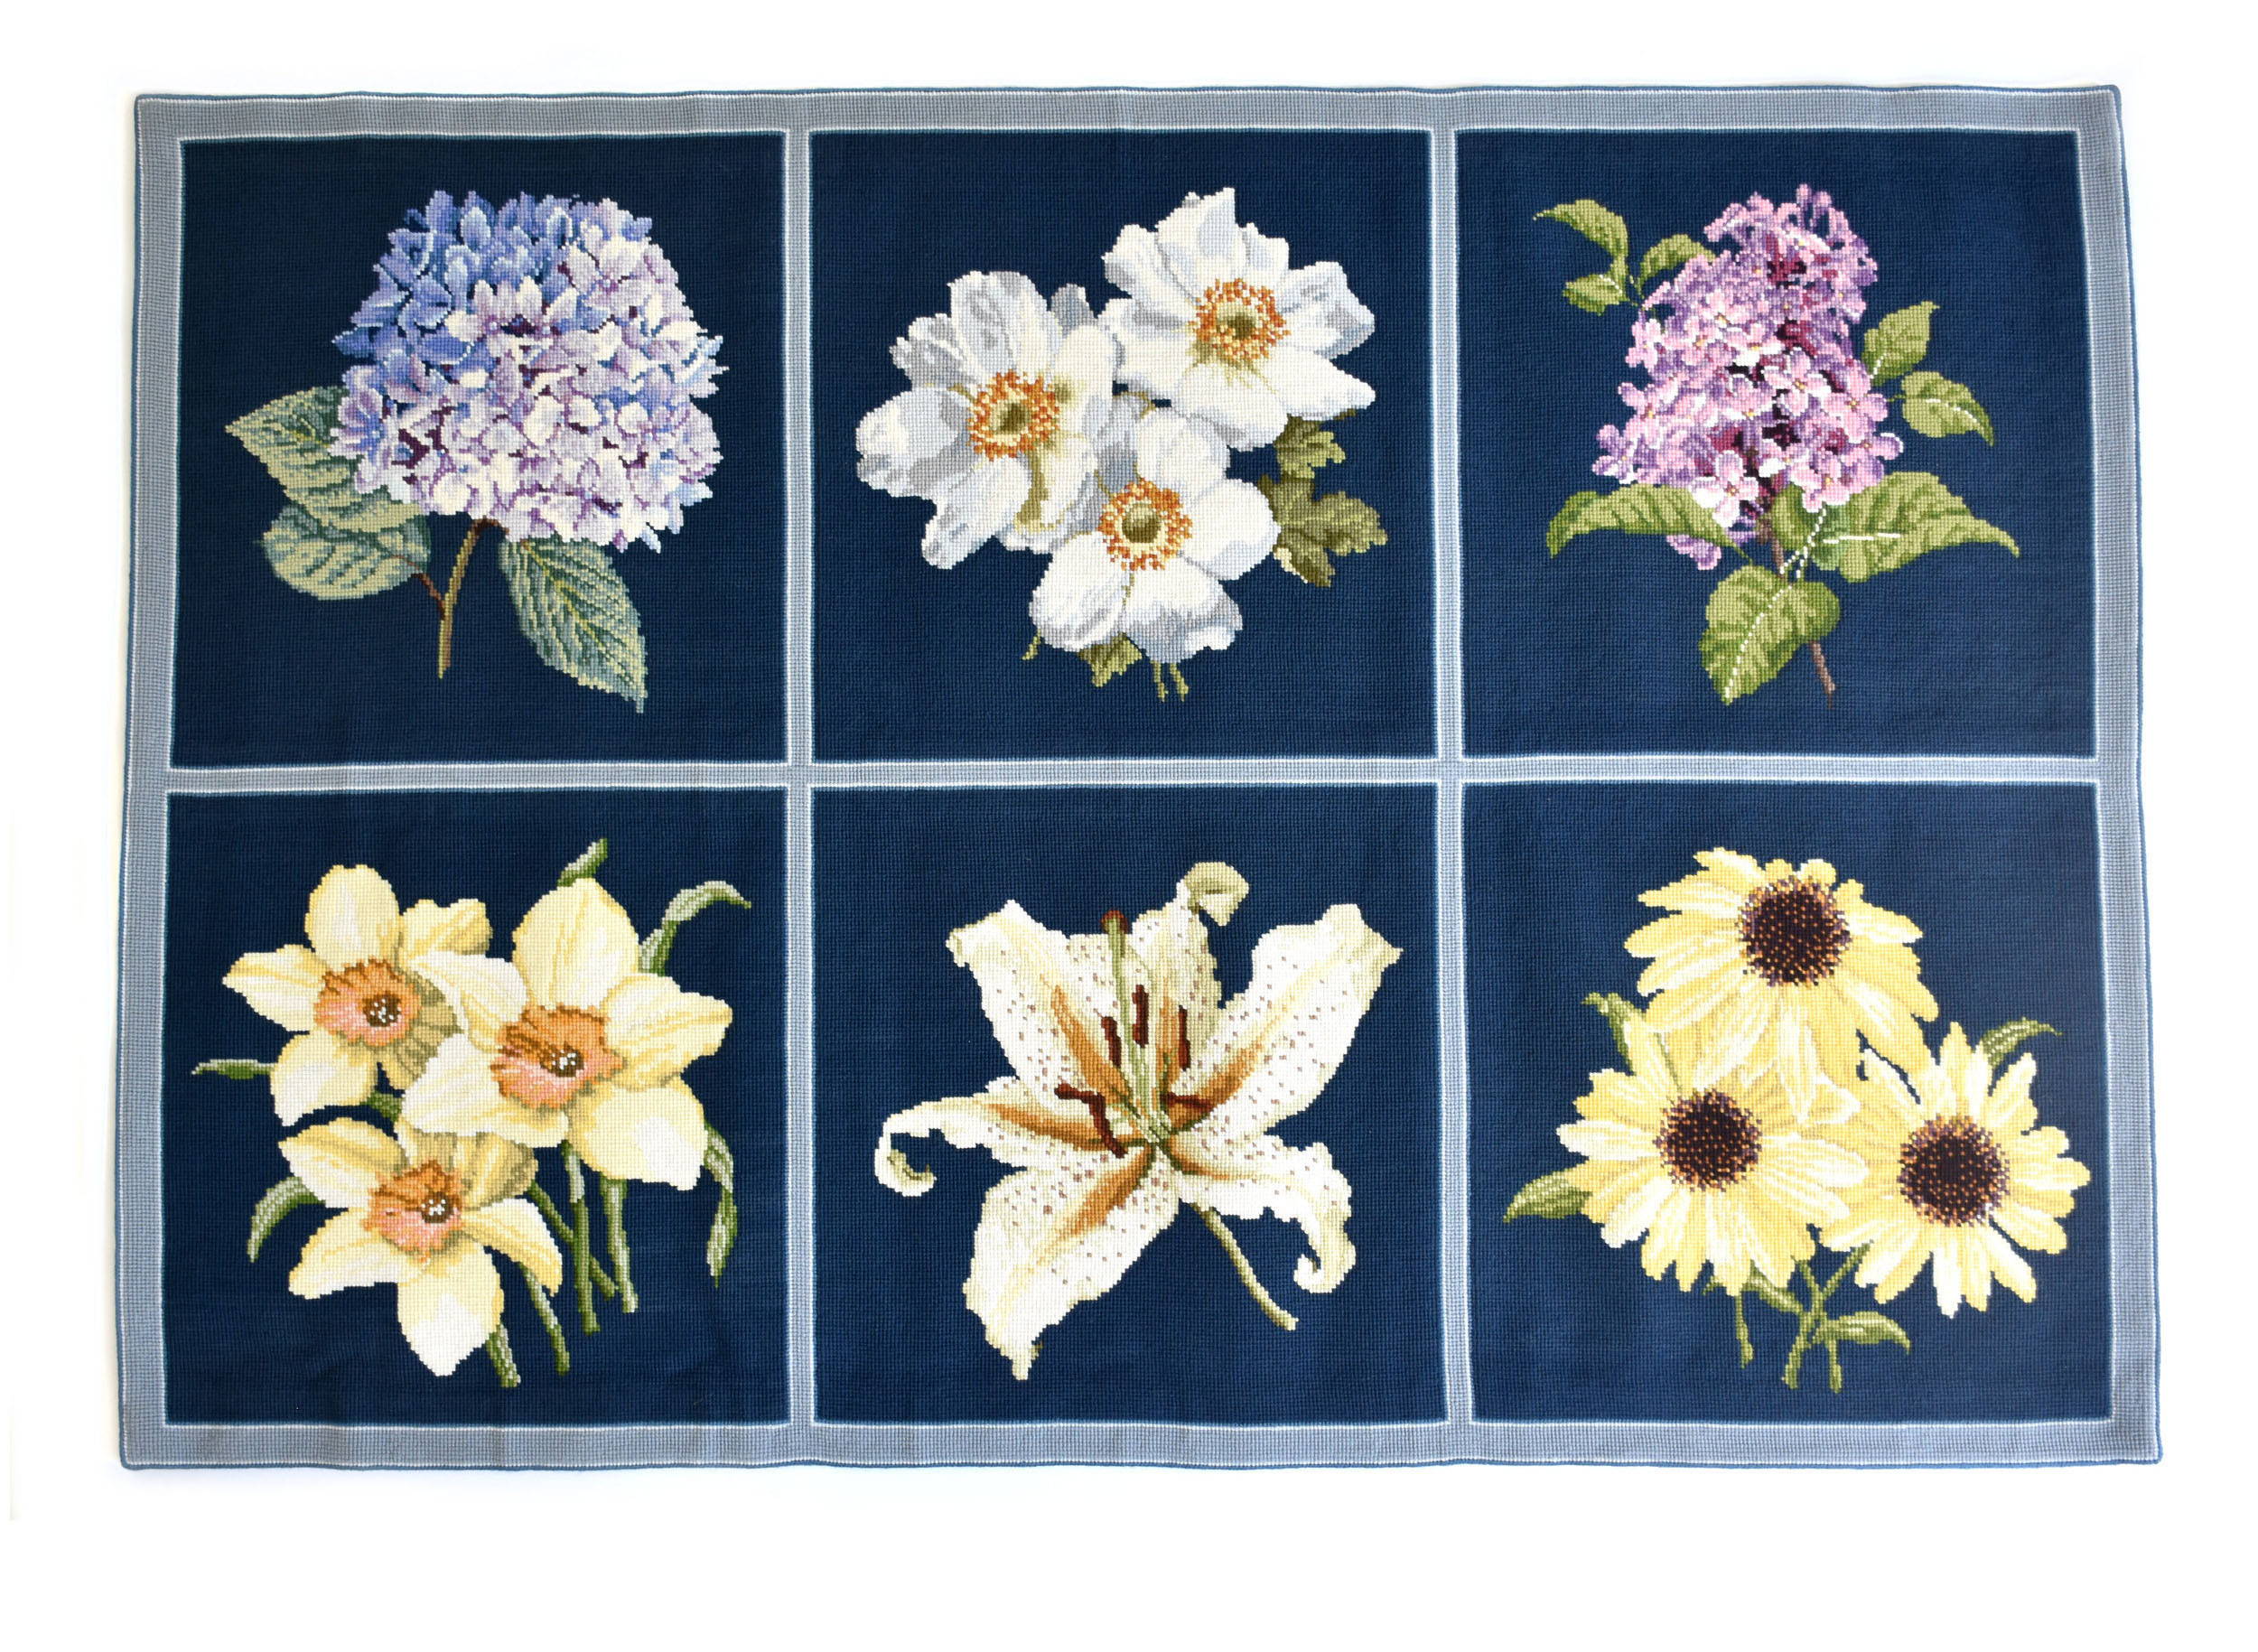 The Blooms Collection finished as a 6 panel carpet with a simple border